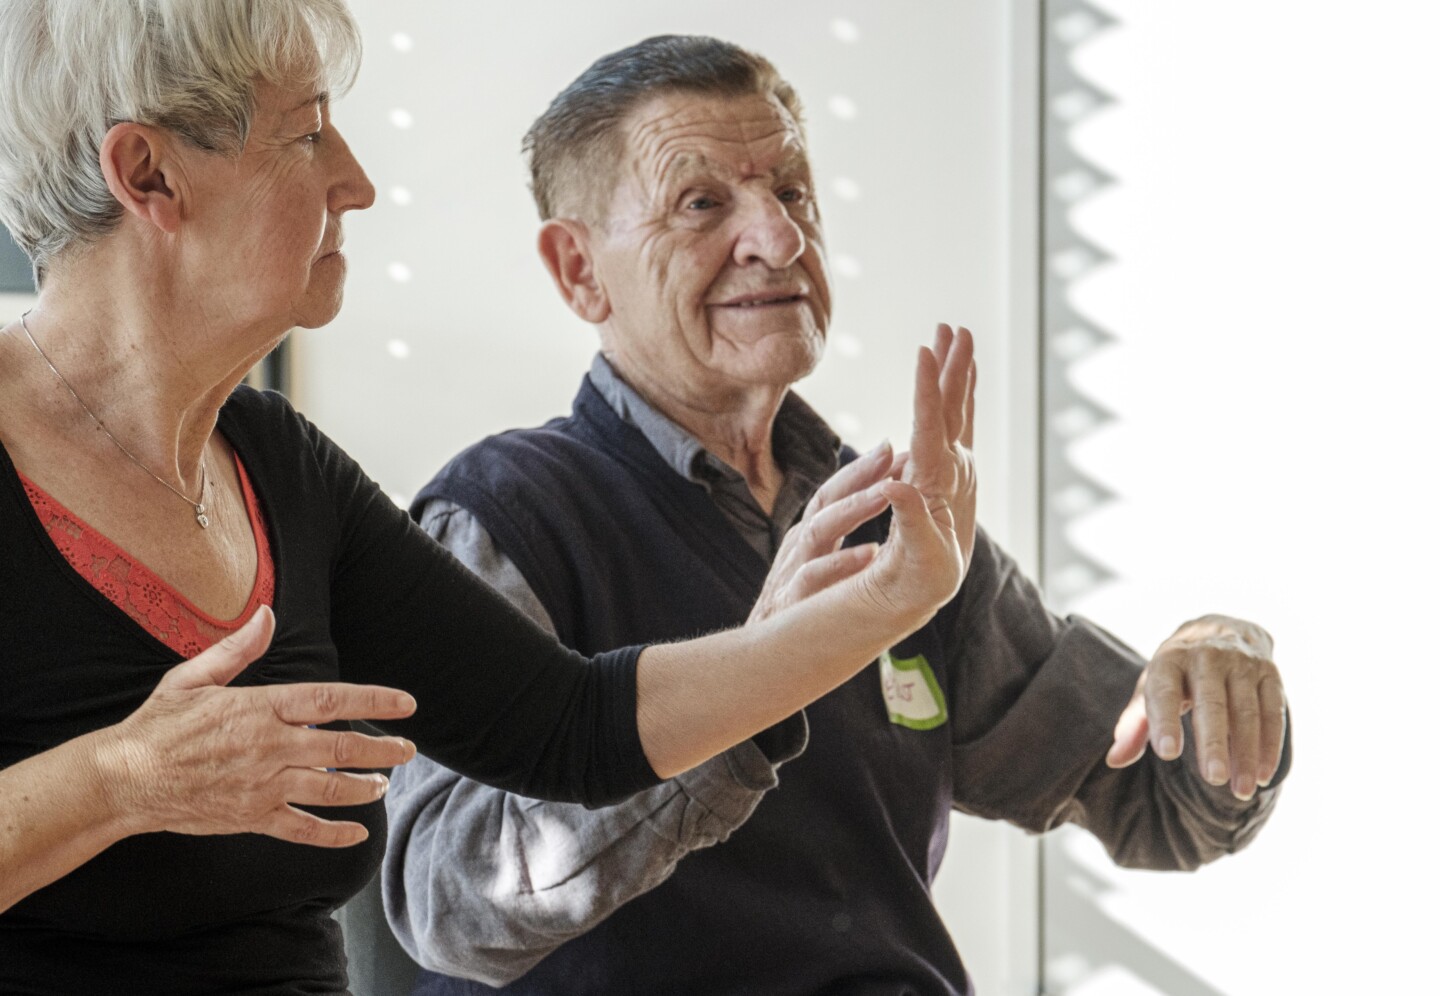 An elderly woman and an elderly man stand next to each other and make dance movements with their hands.